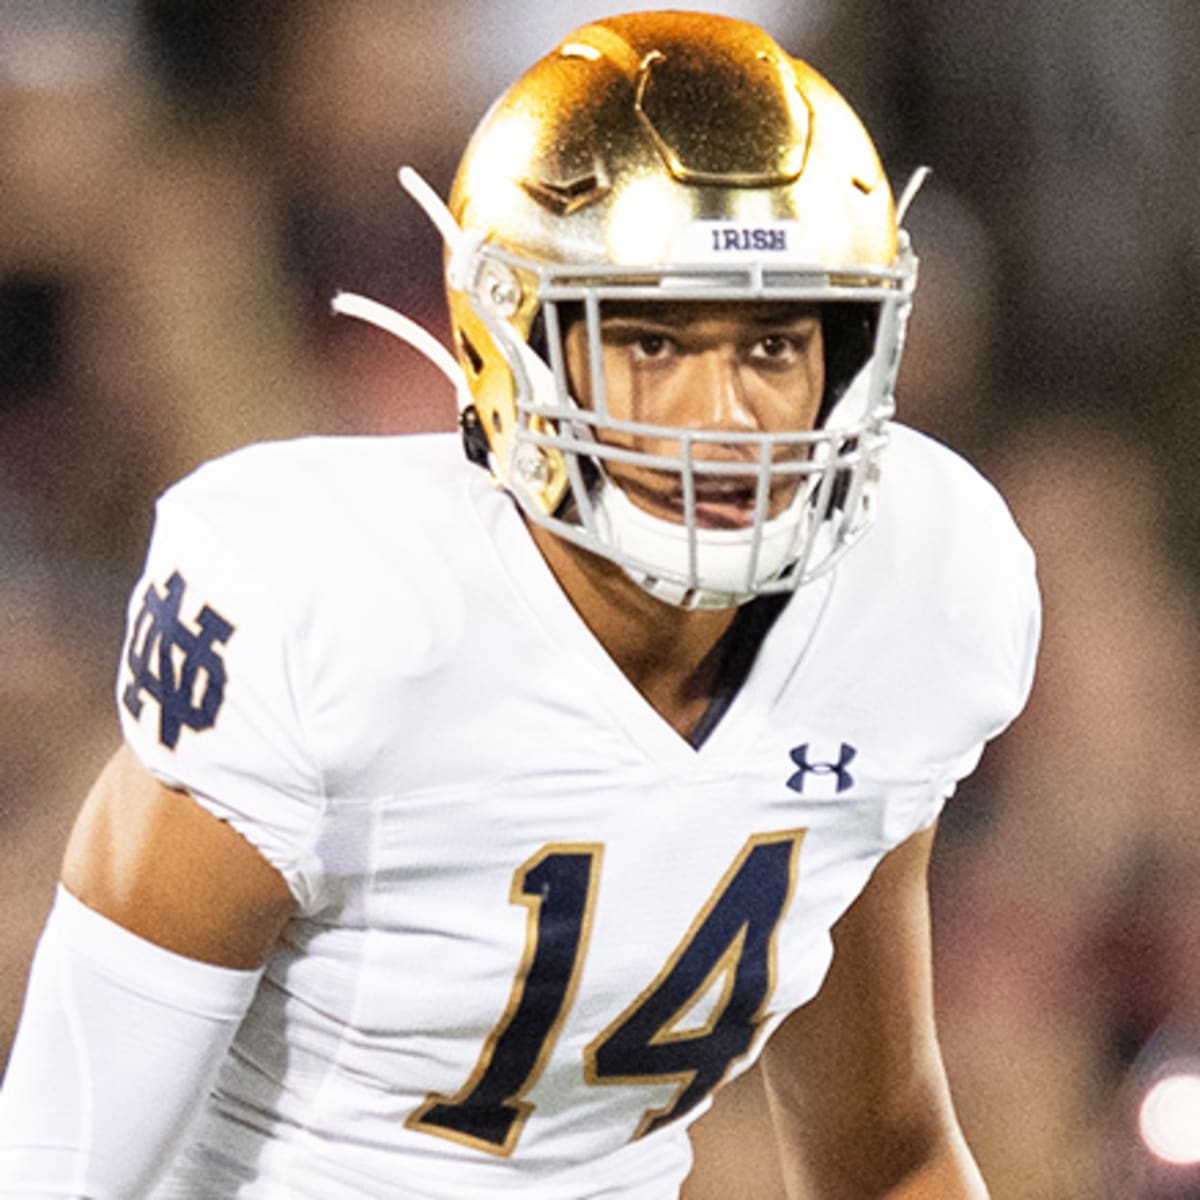 Notre Dame football: Kyle Hamilton named a top-10 player in 2021 by PFF